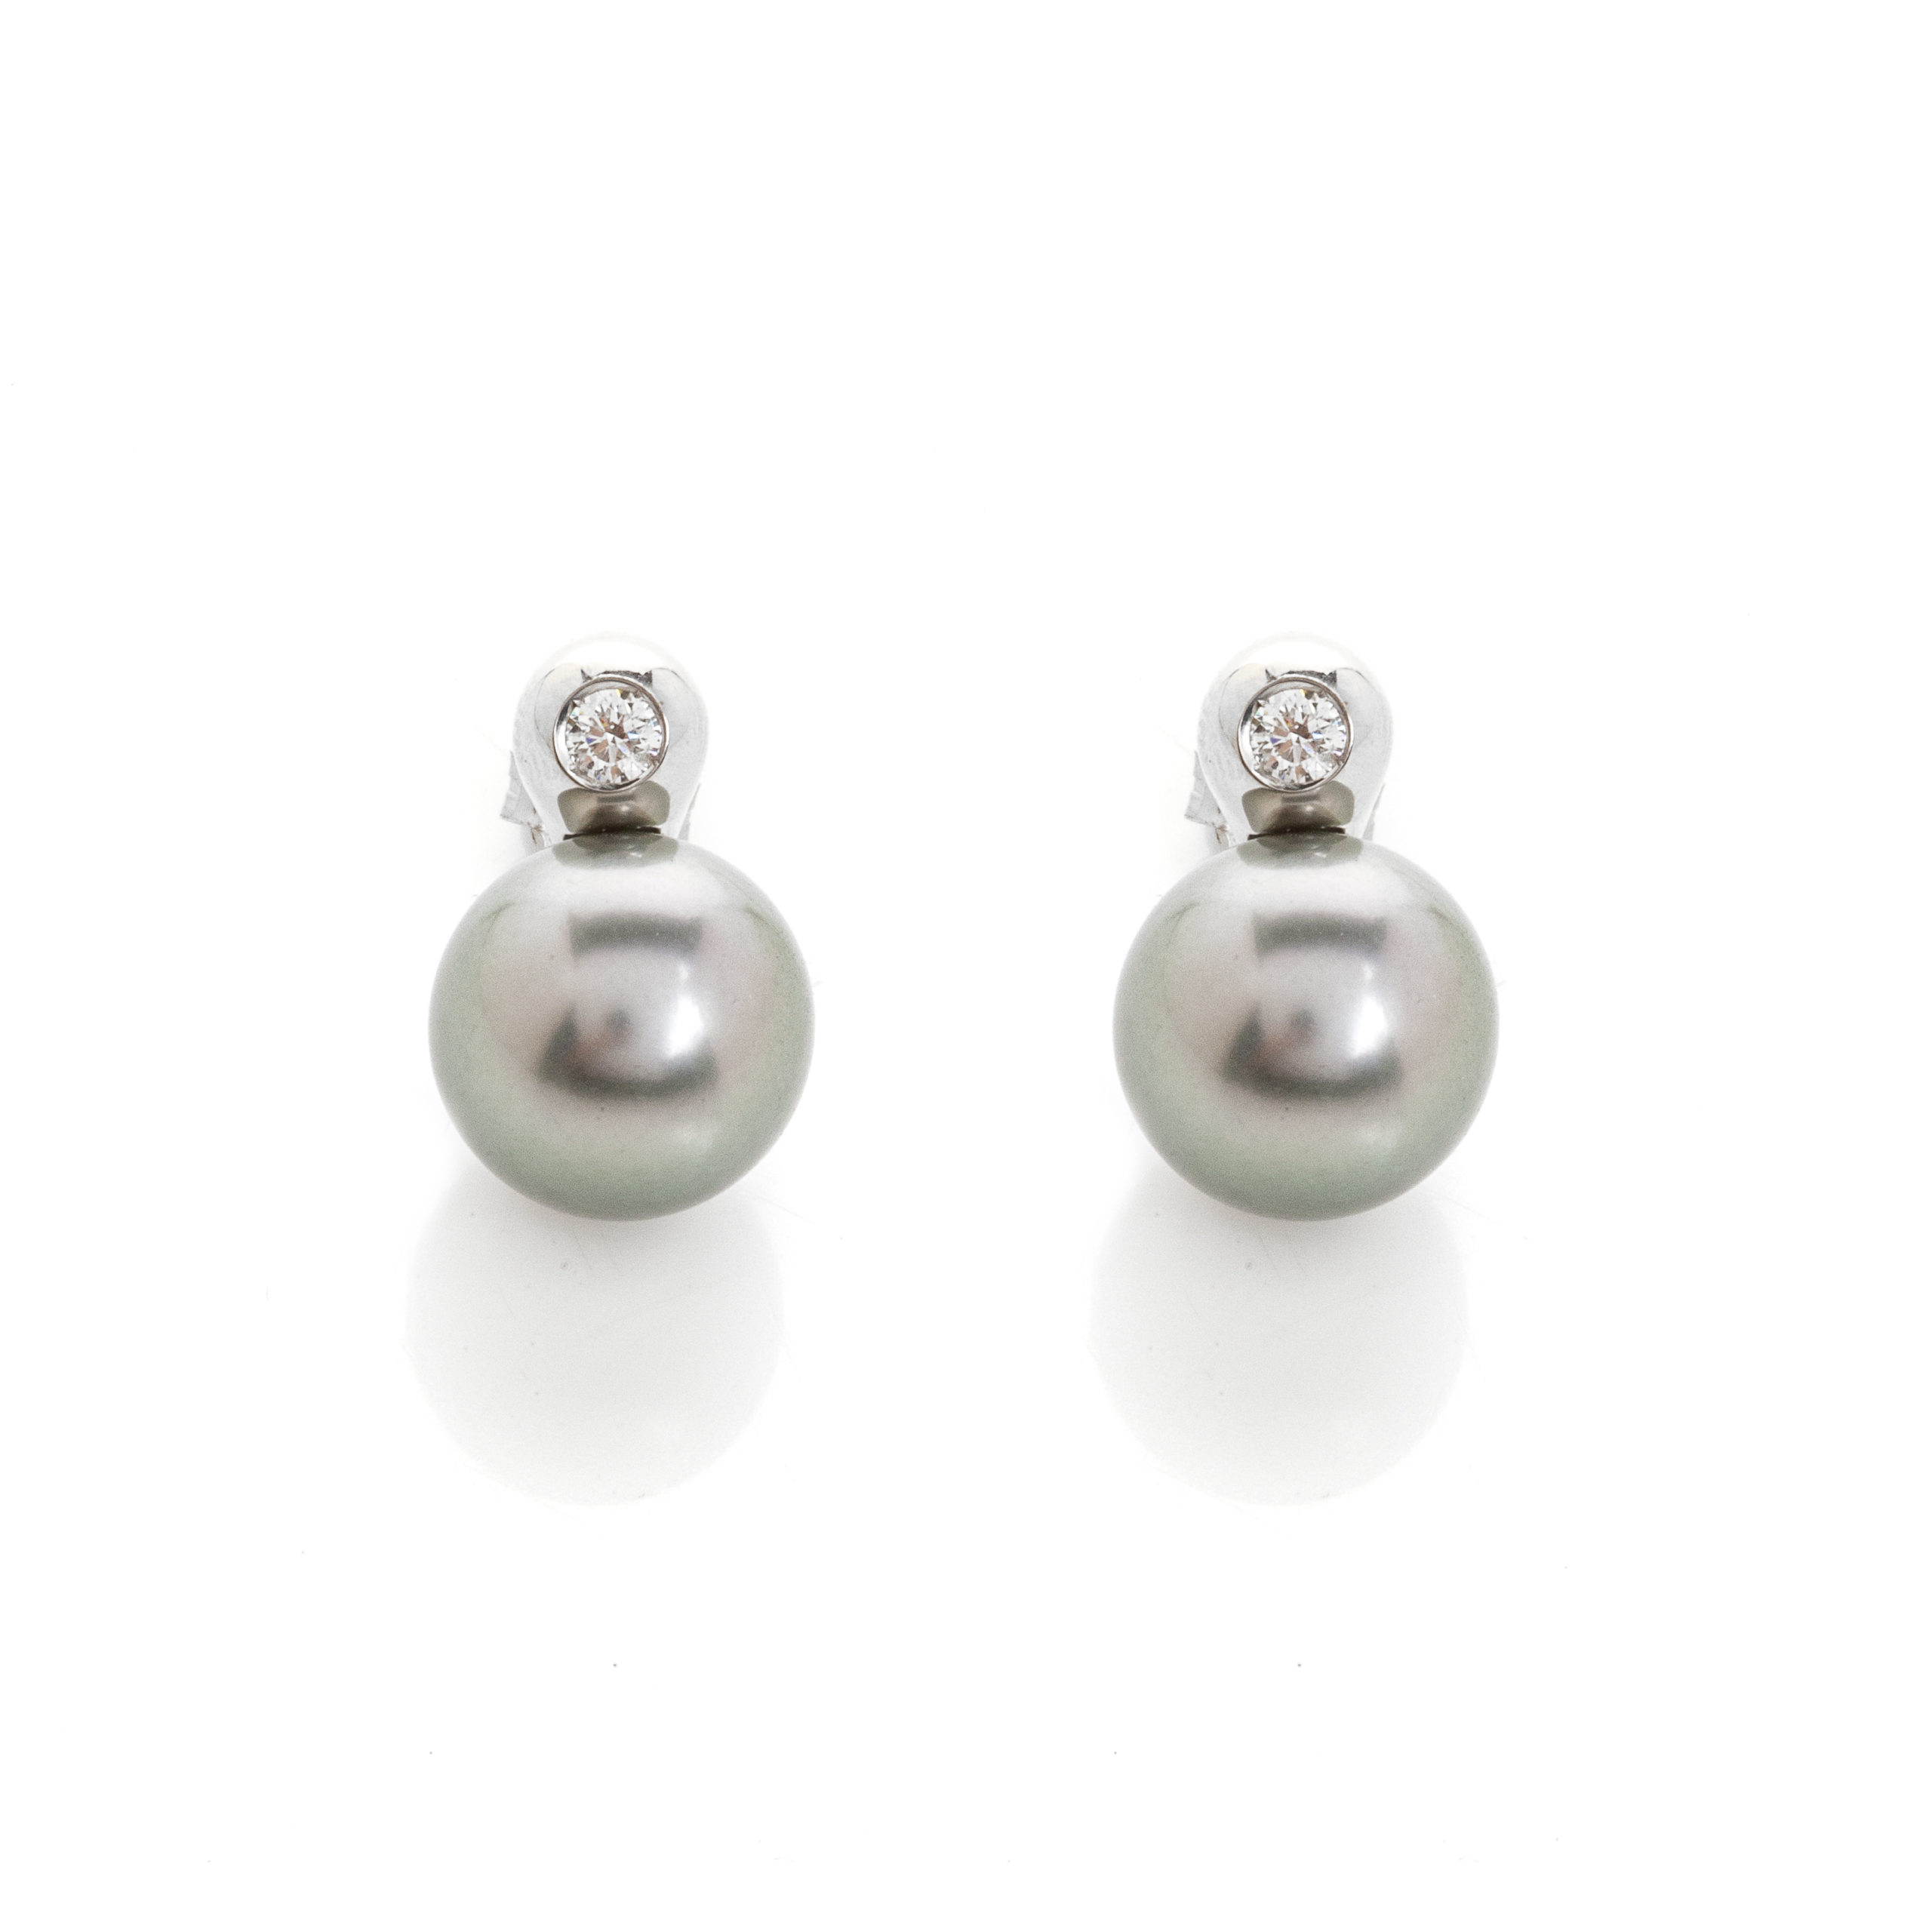 White gold earrings with Tahitian Pearl and Brilliant